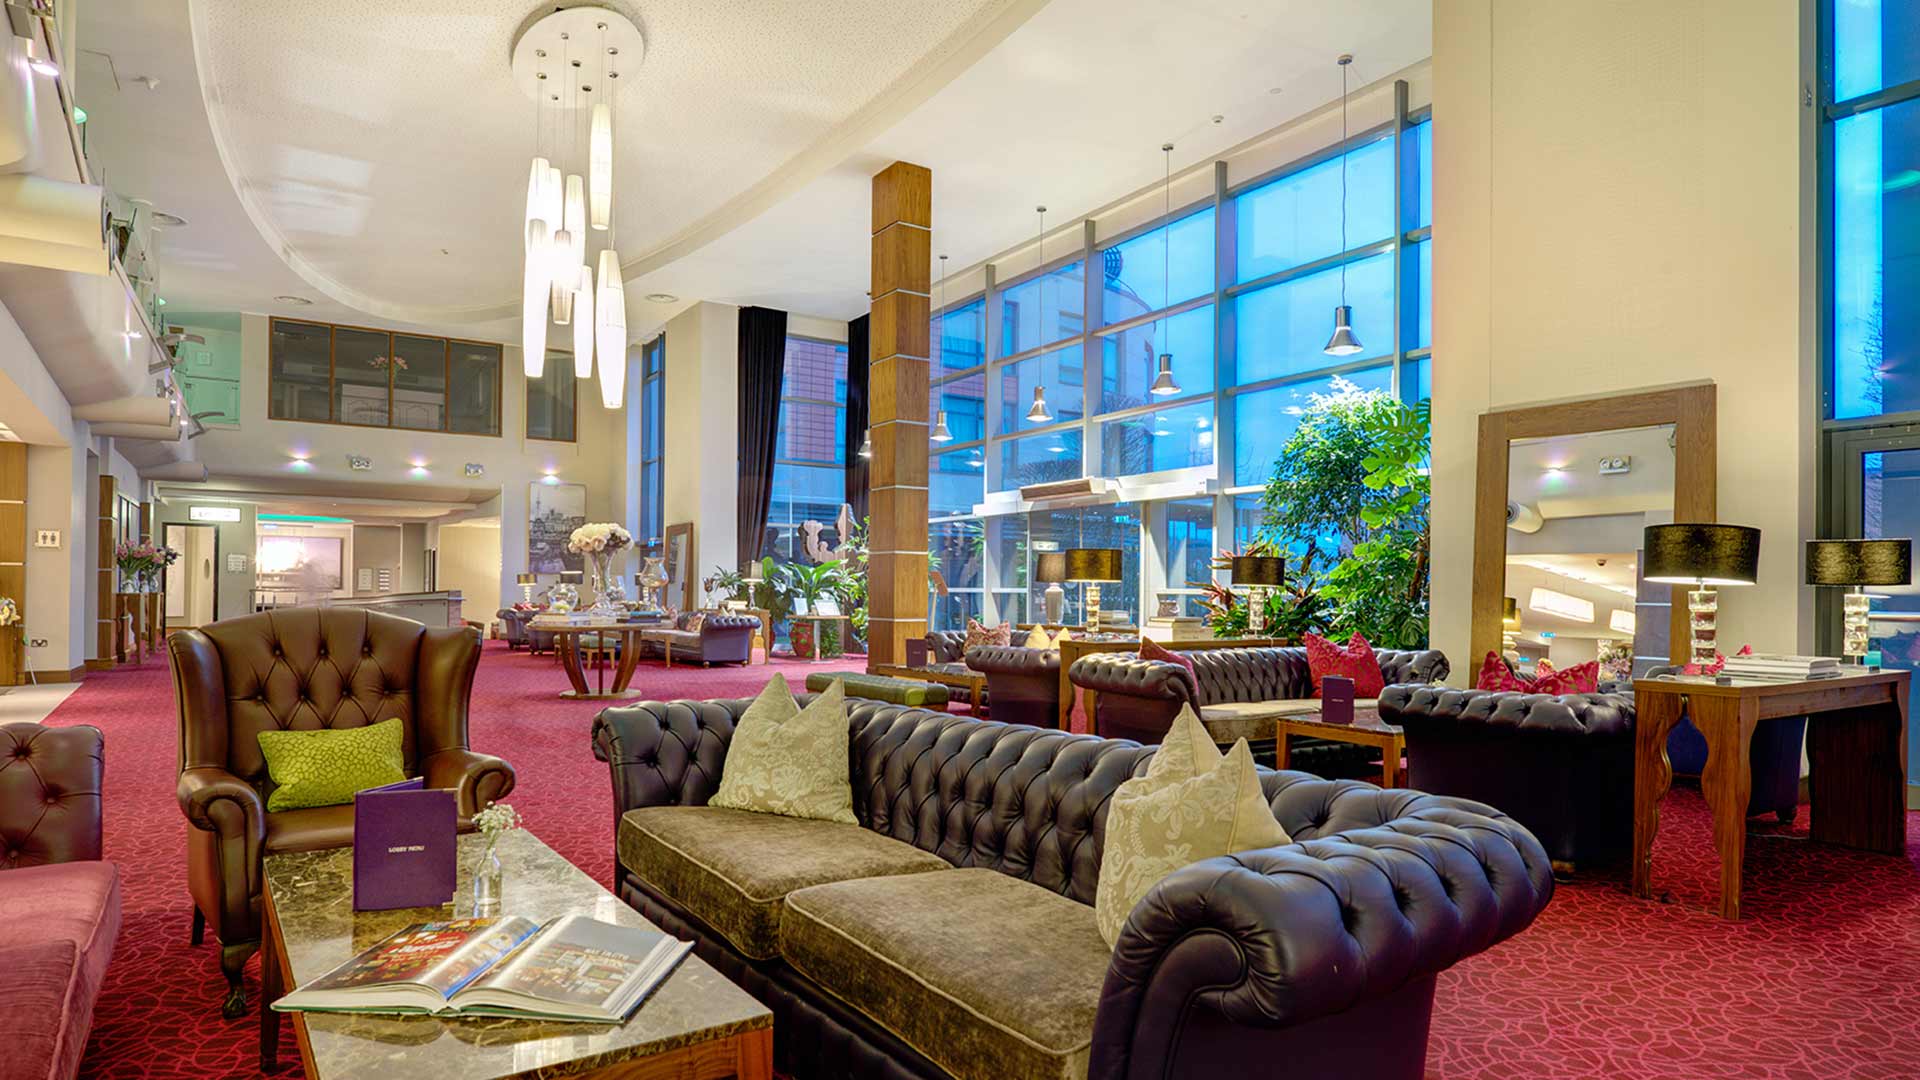 Opulent decor in the seating area and lobby of the Luxury Cork International Hotel